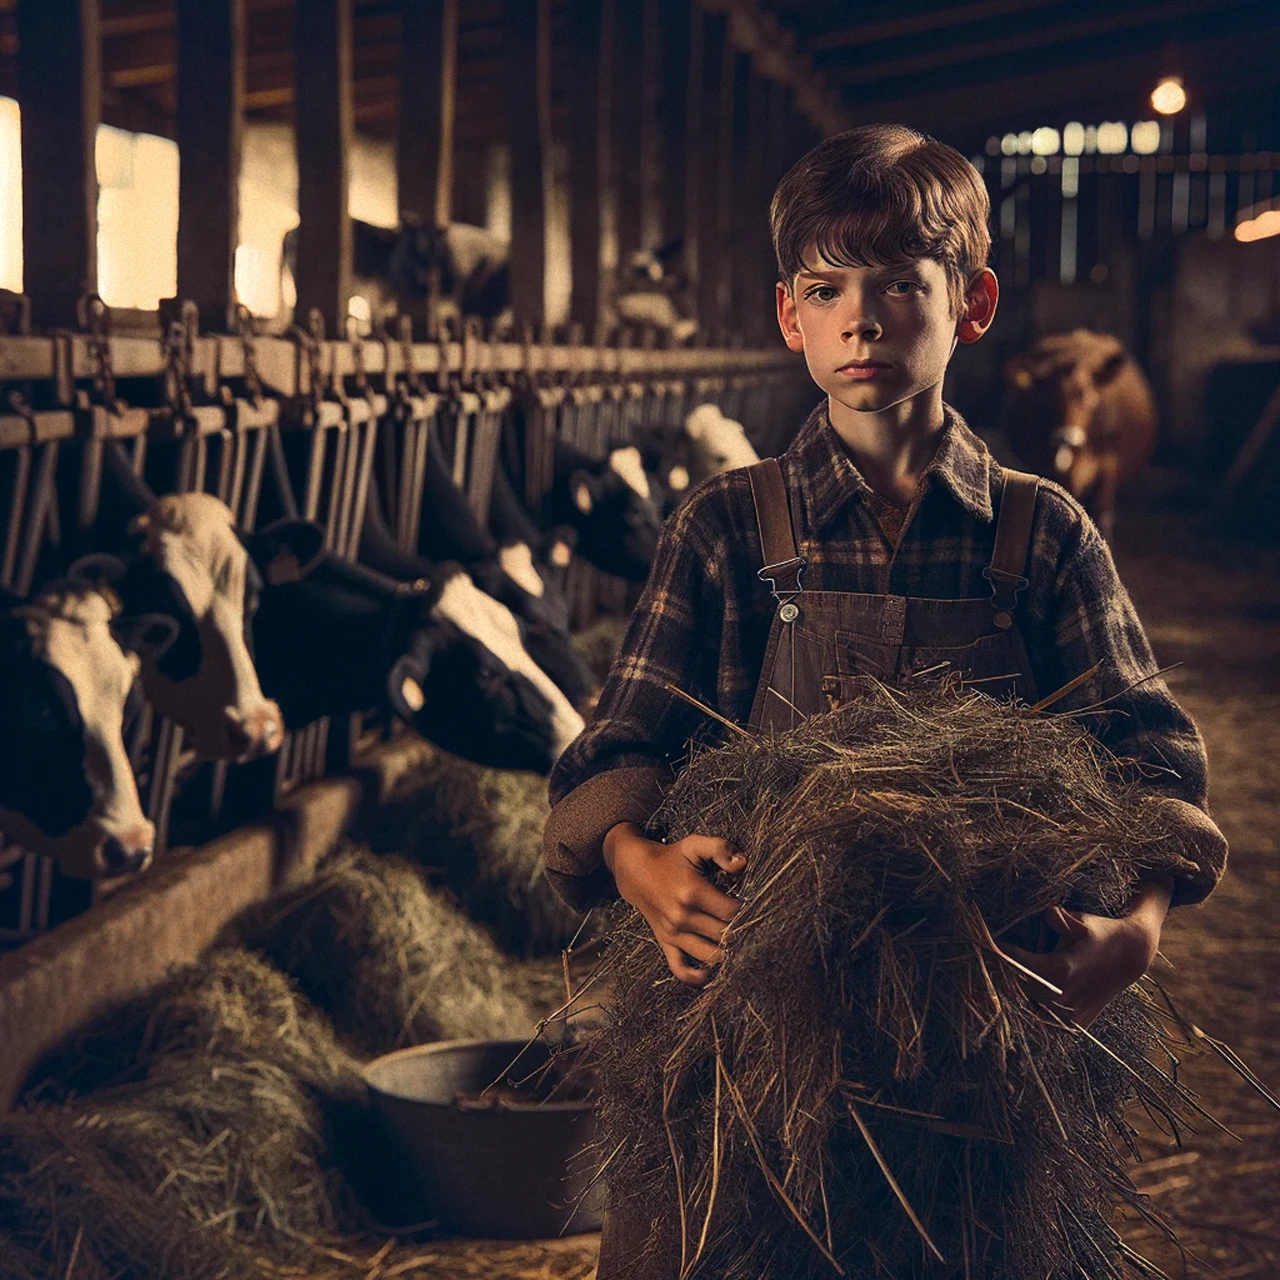 A photograph from the 1980's of a young boy holding hay in a cattle barn